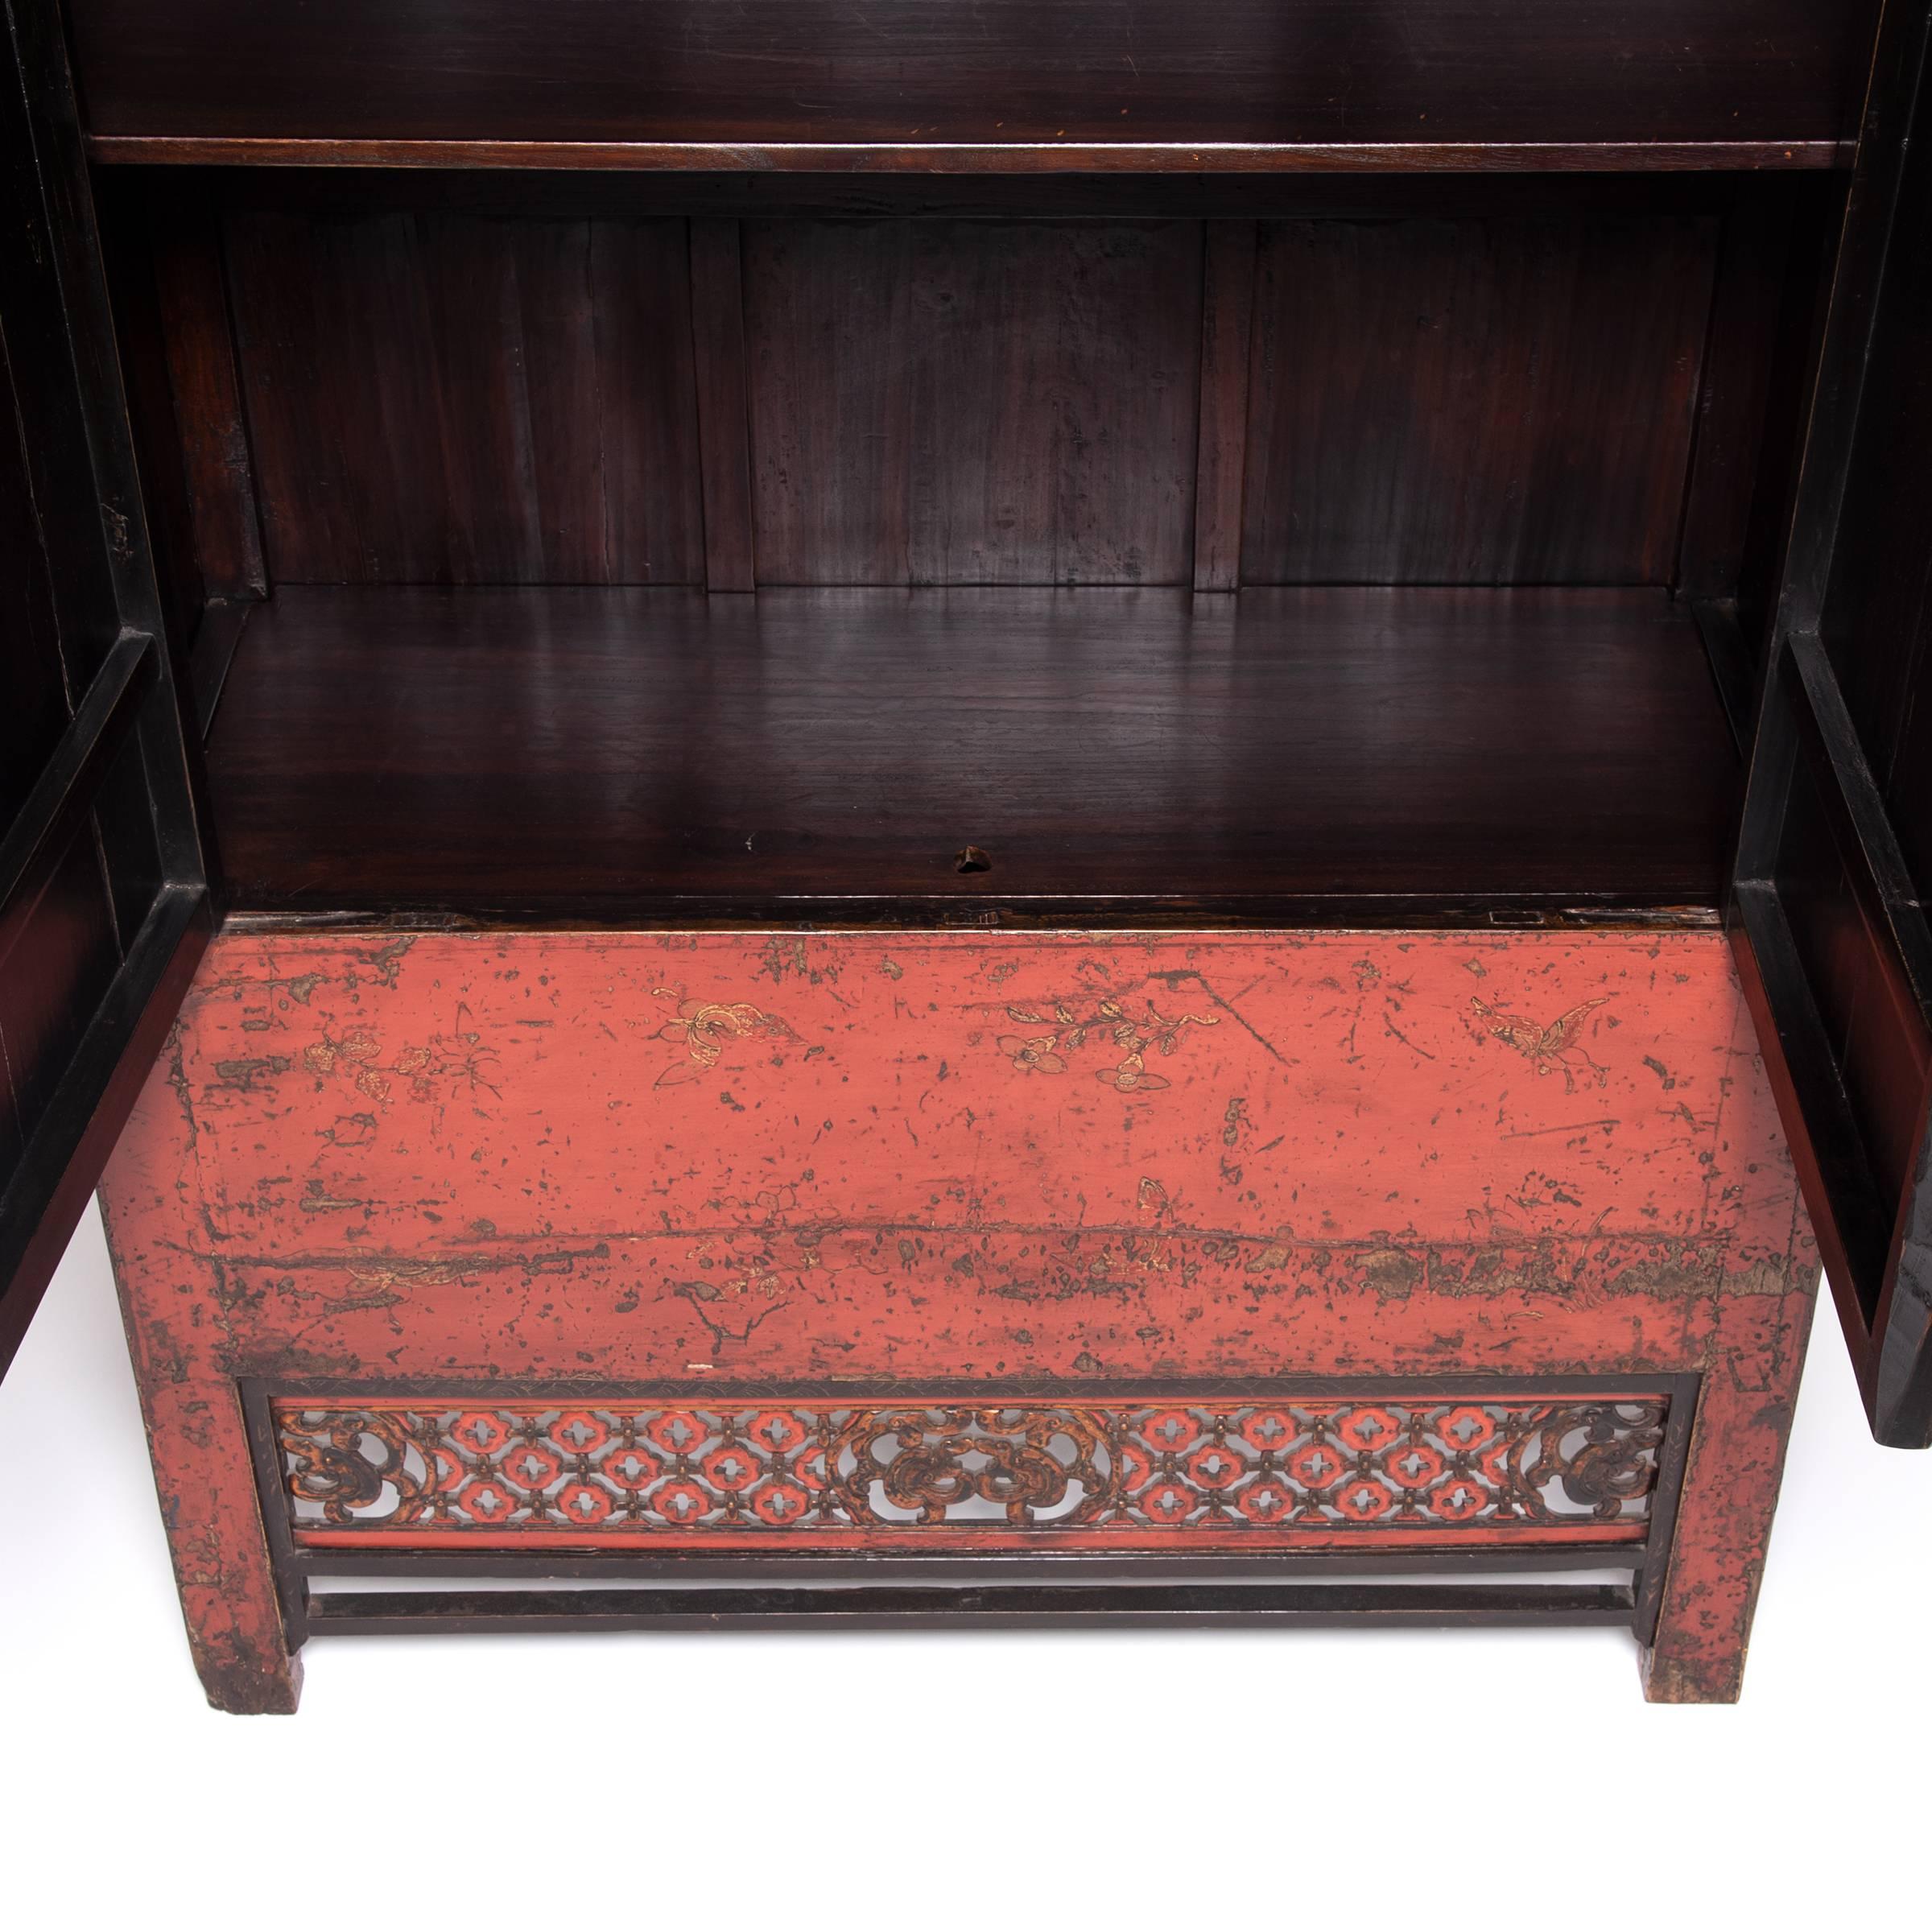 19th Century Chinese Gilt Red Lacquer Scholars' Cabinet, c. 1850